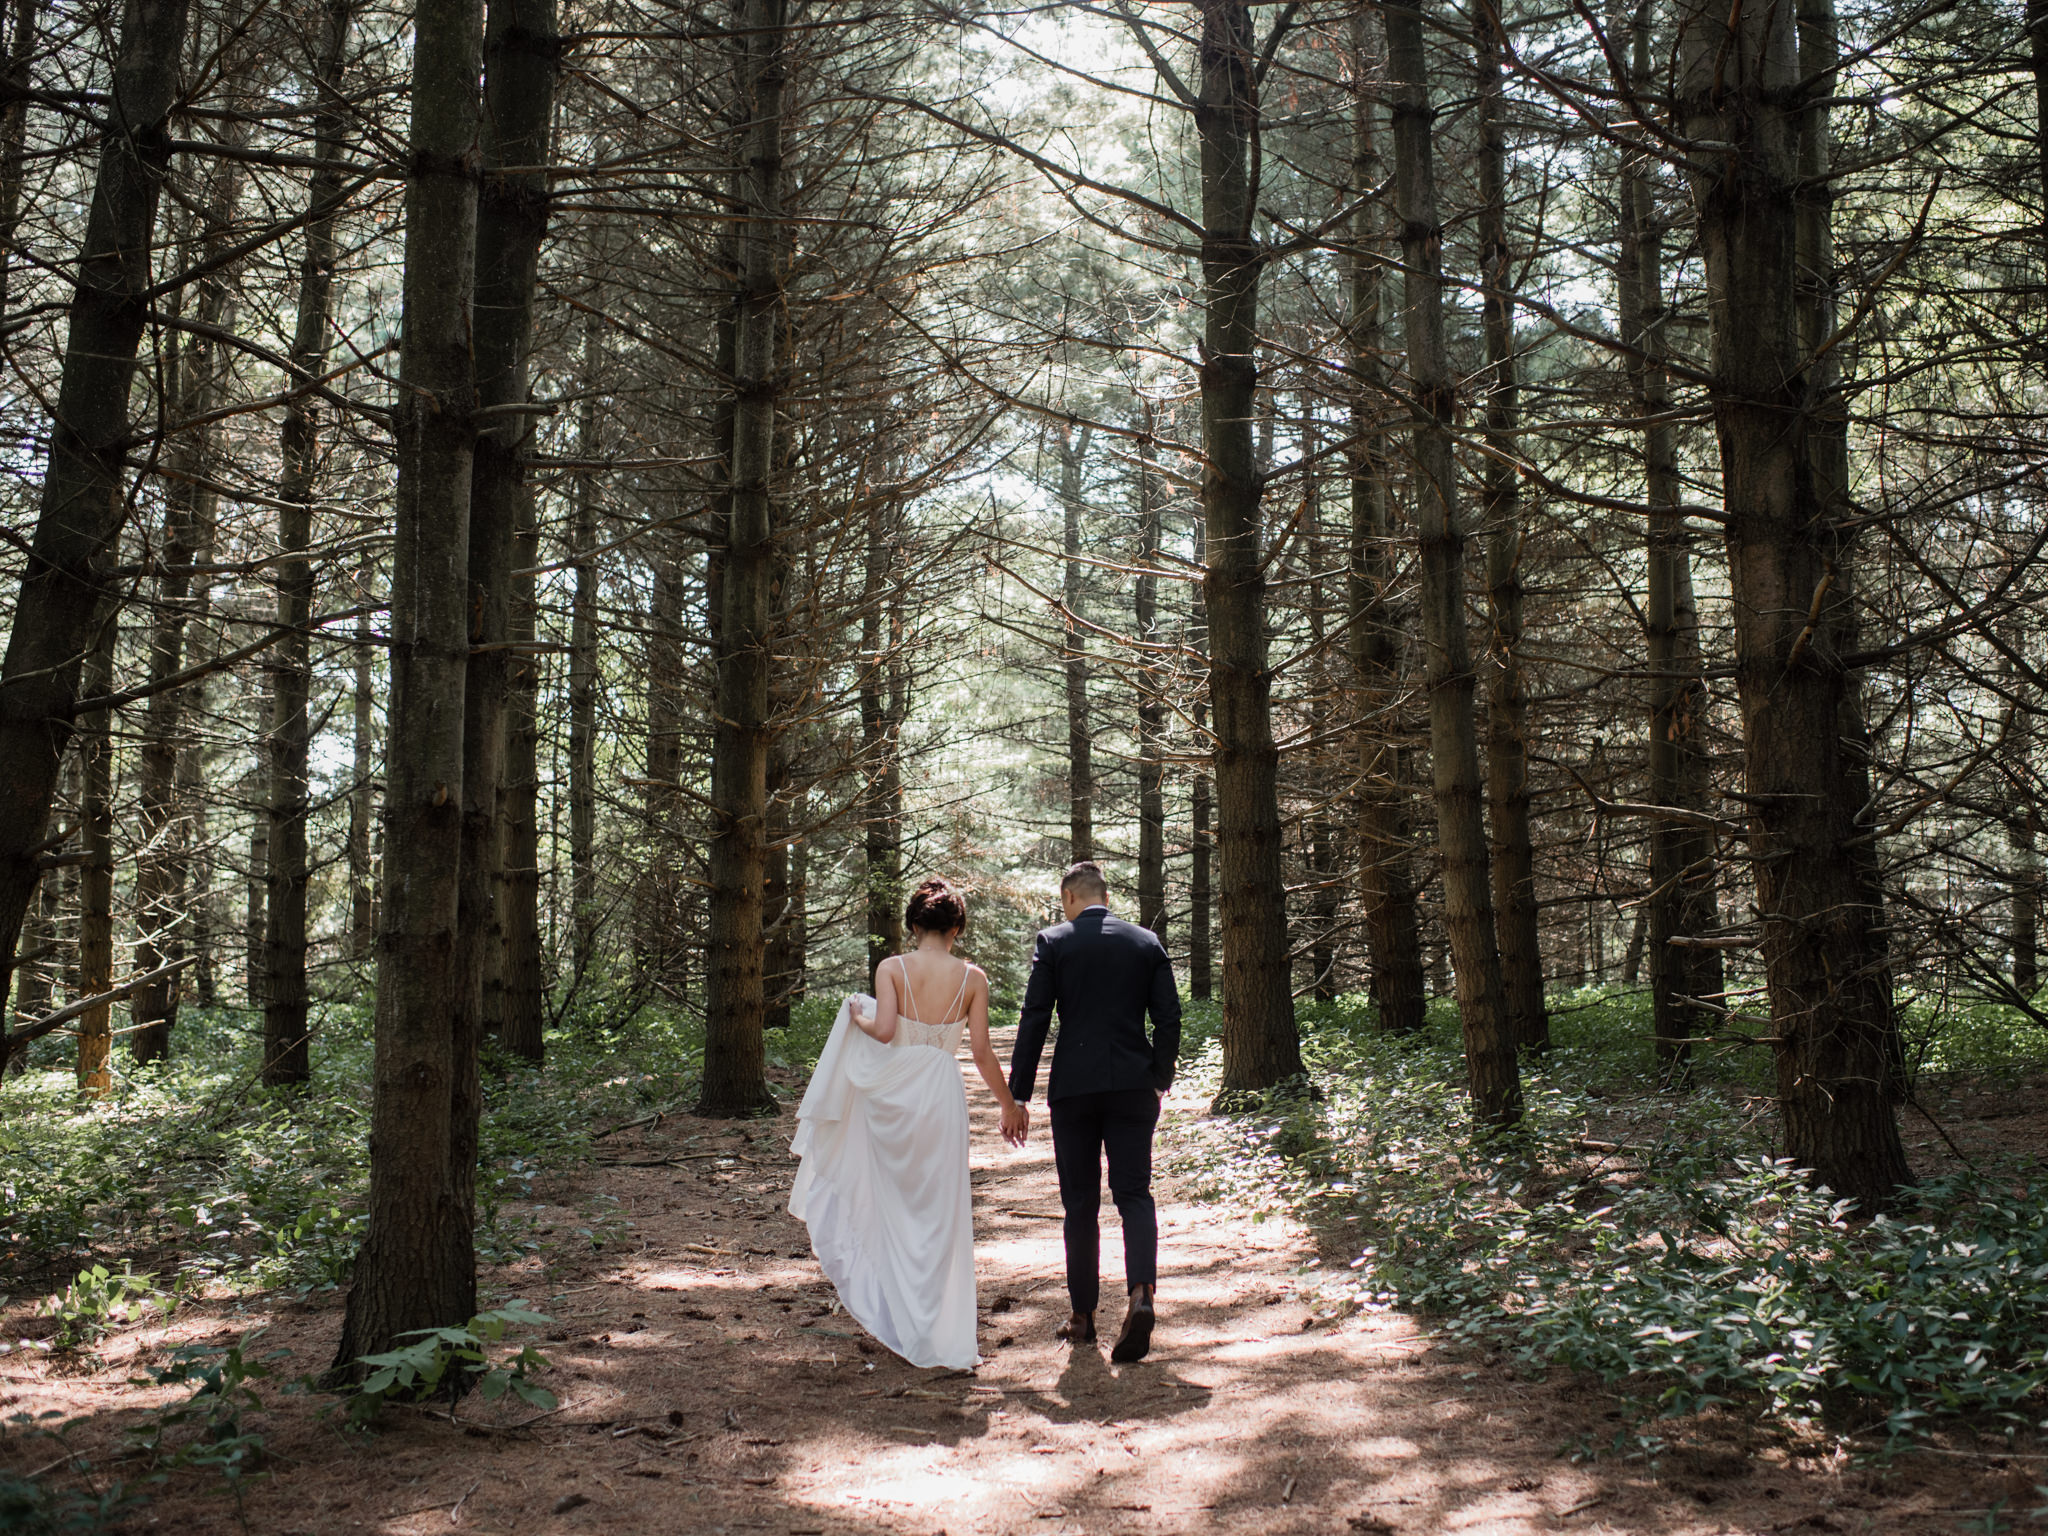 Wedding portraits of bride and groom in forest